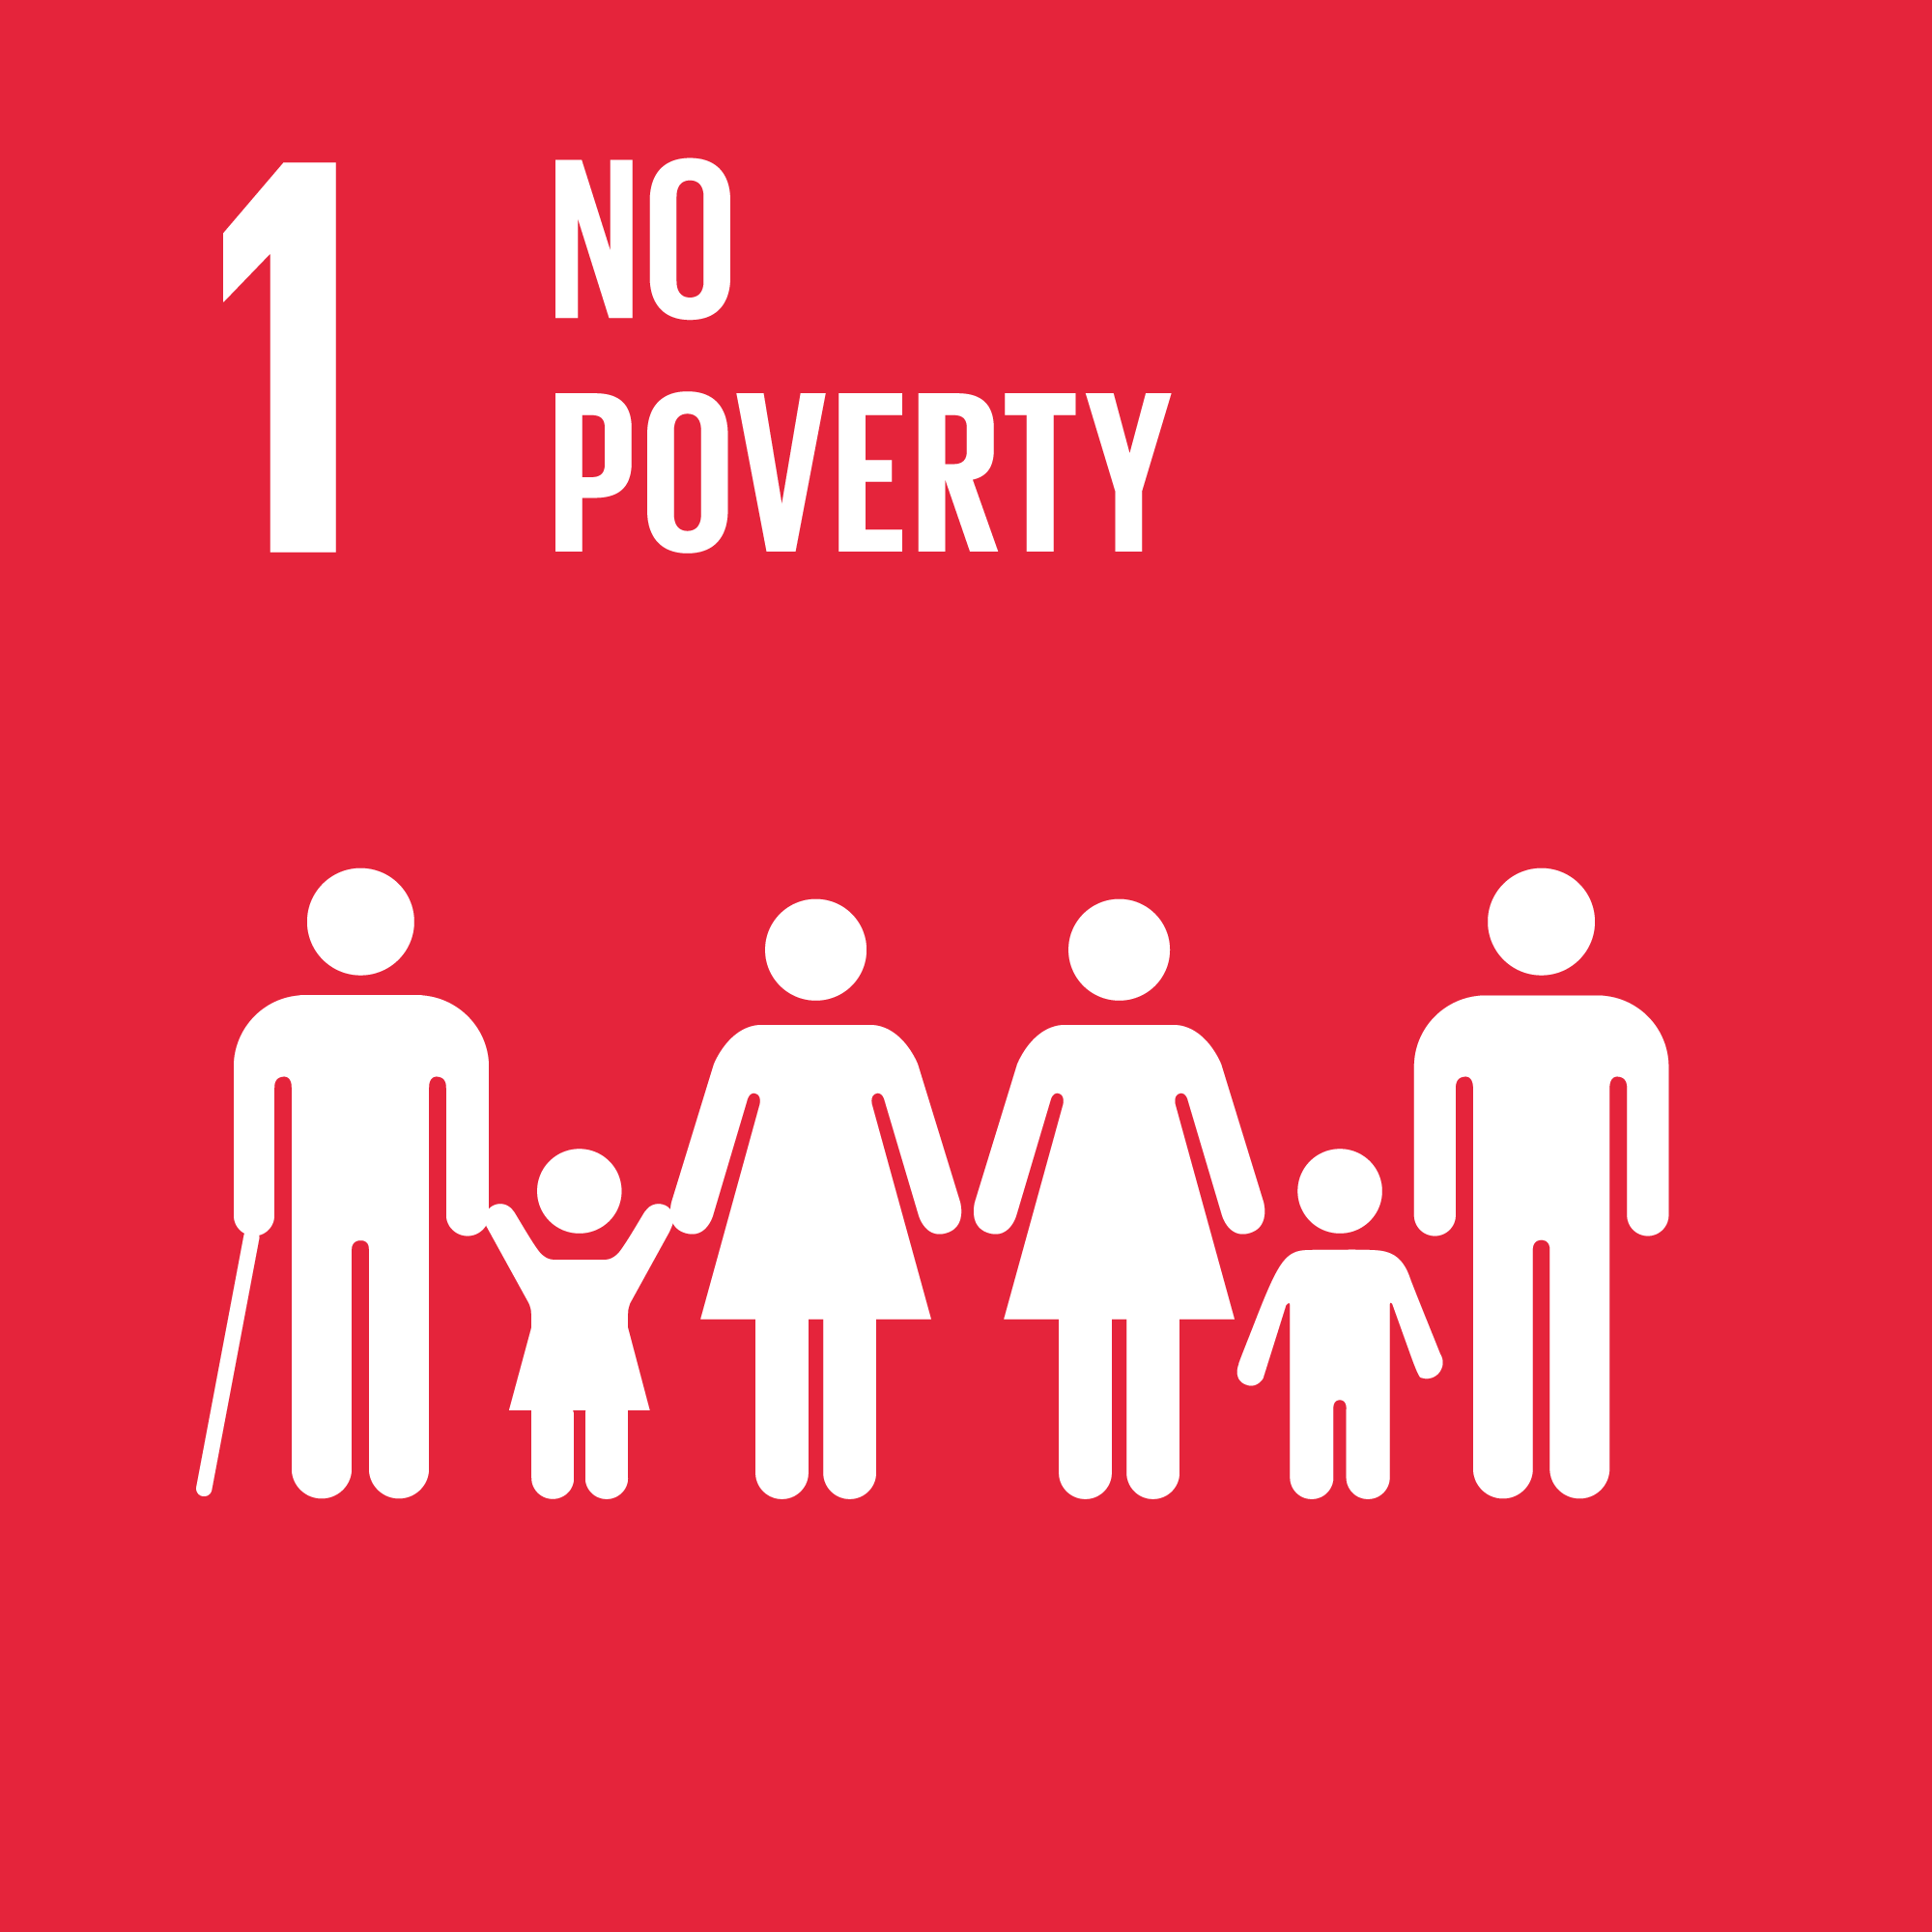  Goal 1: No Poverty - End poverty in all it's forms, everywhere. 